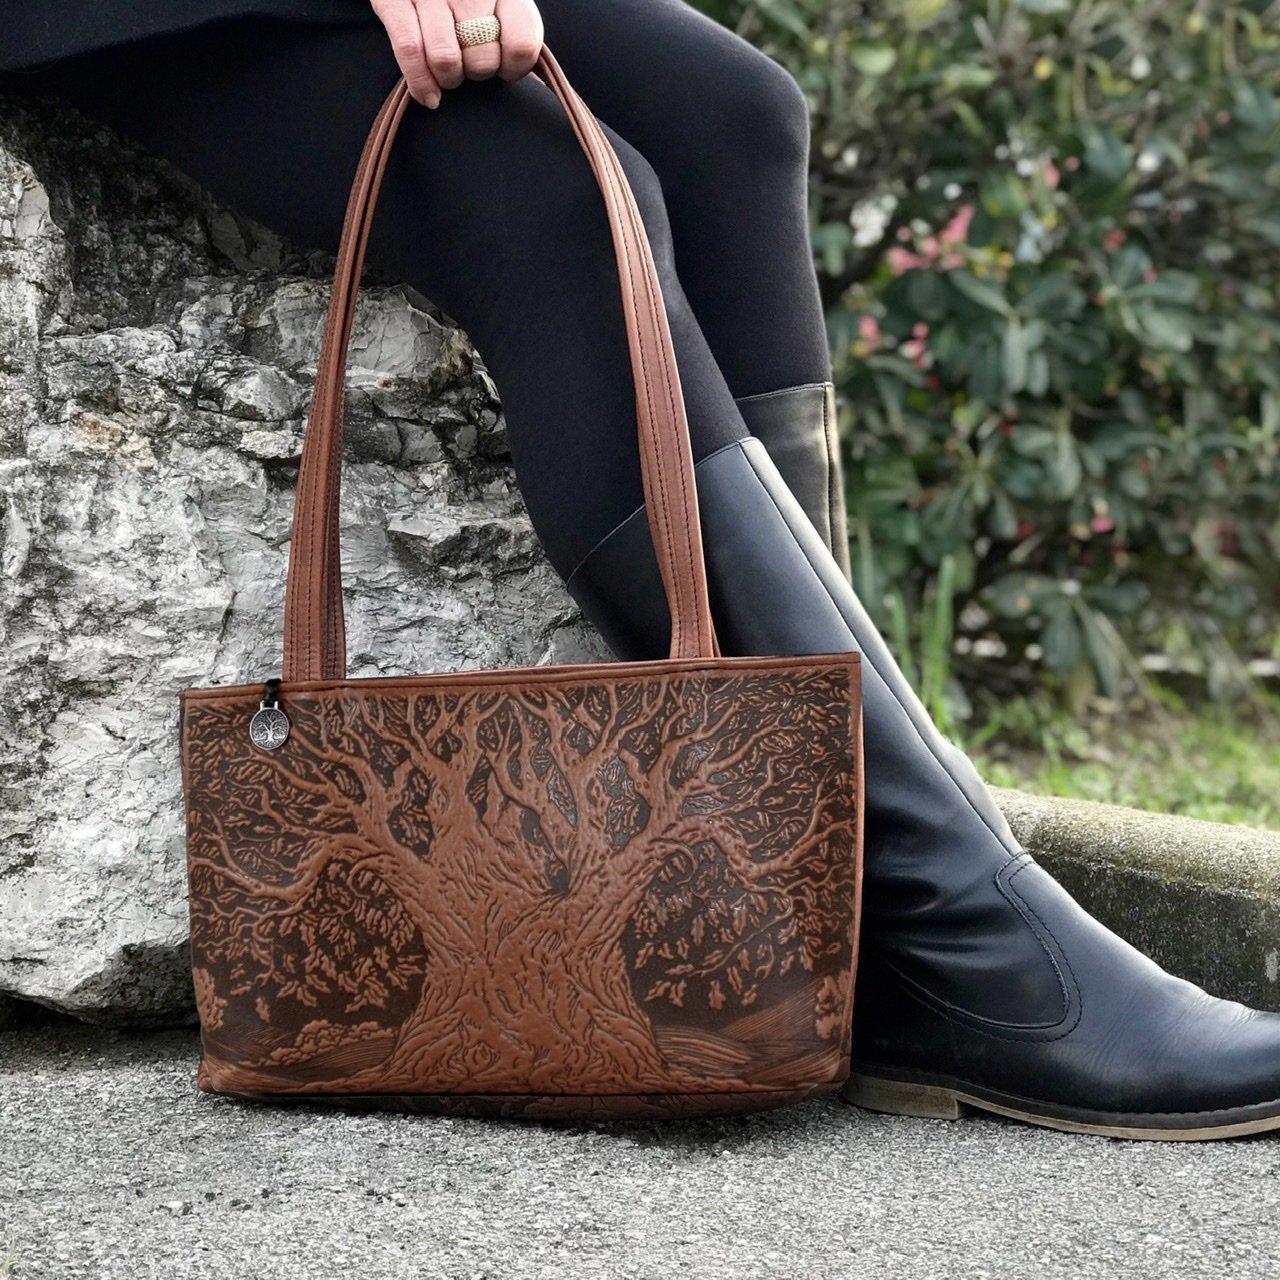 Oberon Design Hand-Crafted Messenger Bags, Totes and Handbags